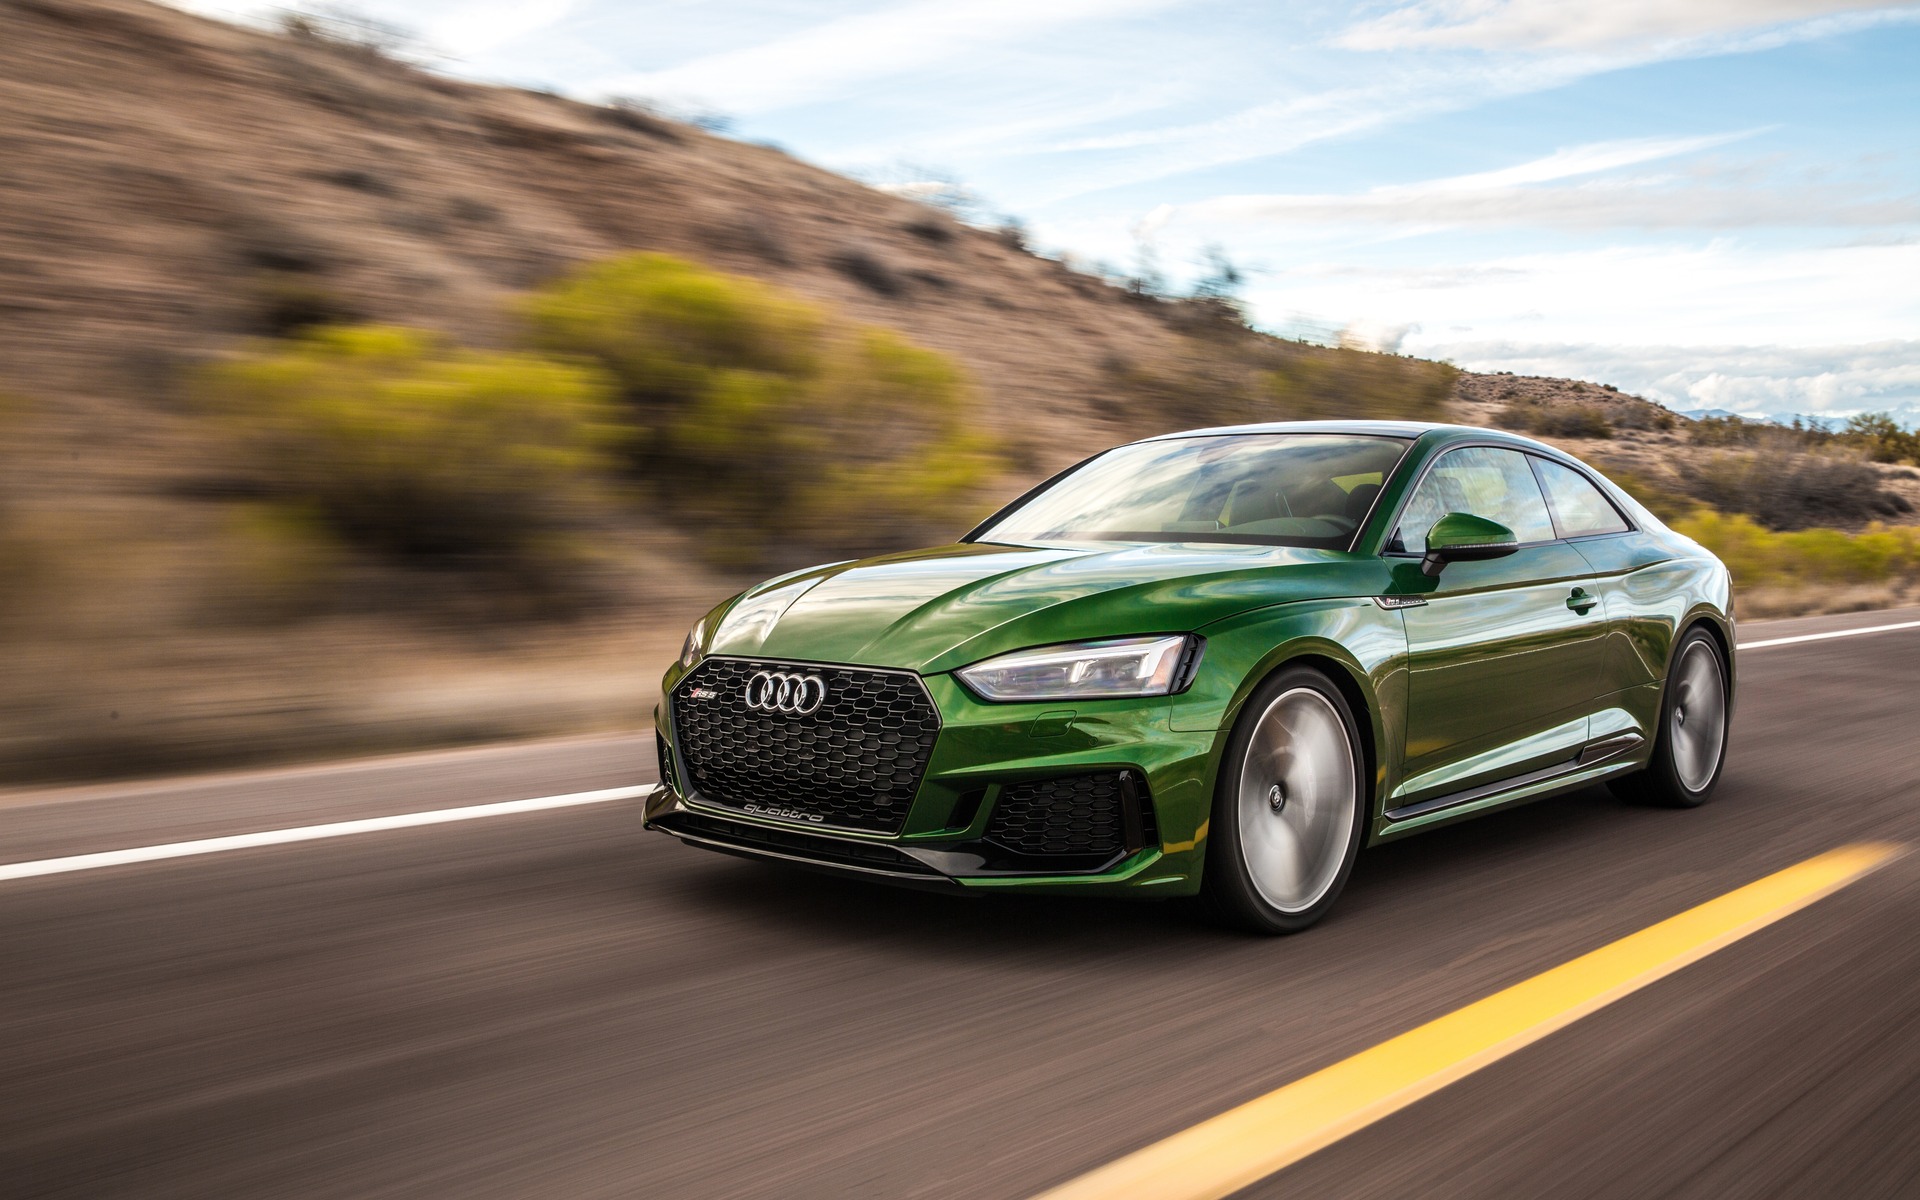 2019 Audi A5, Everything You Need To Know